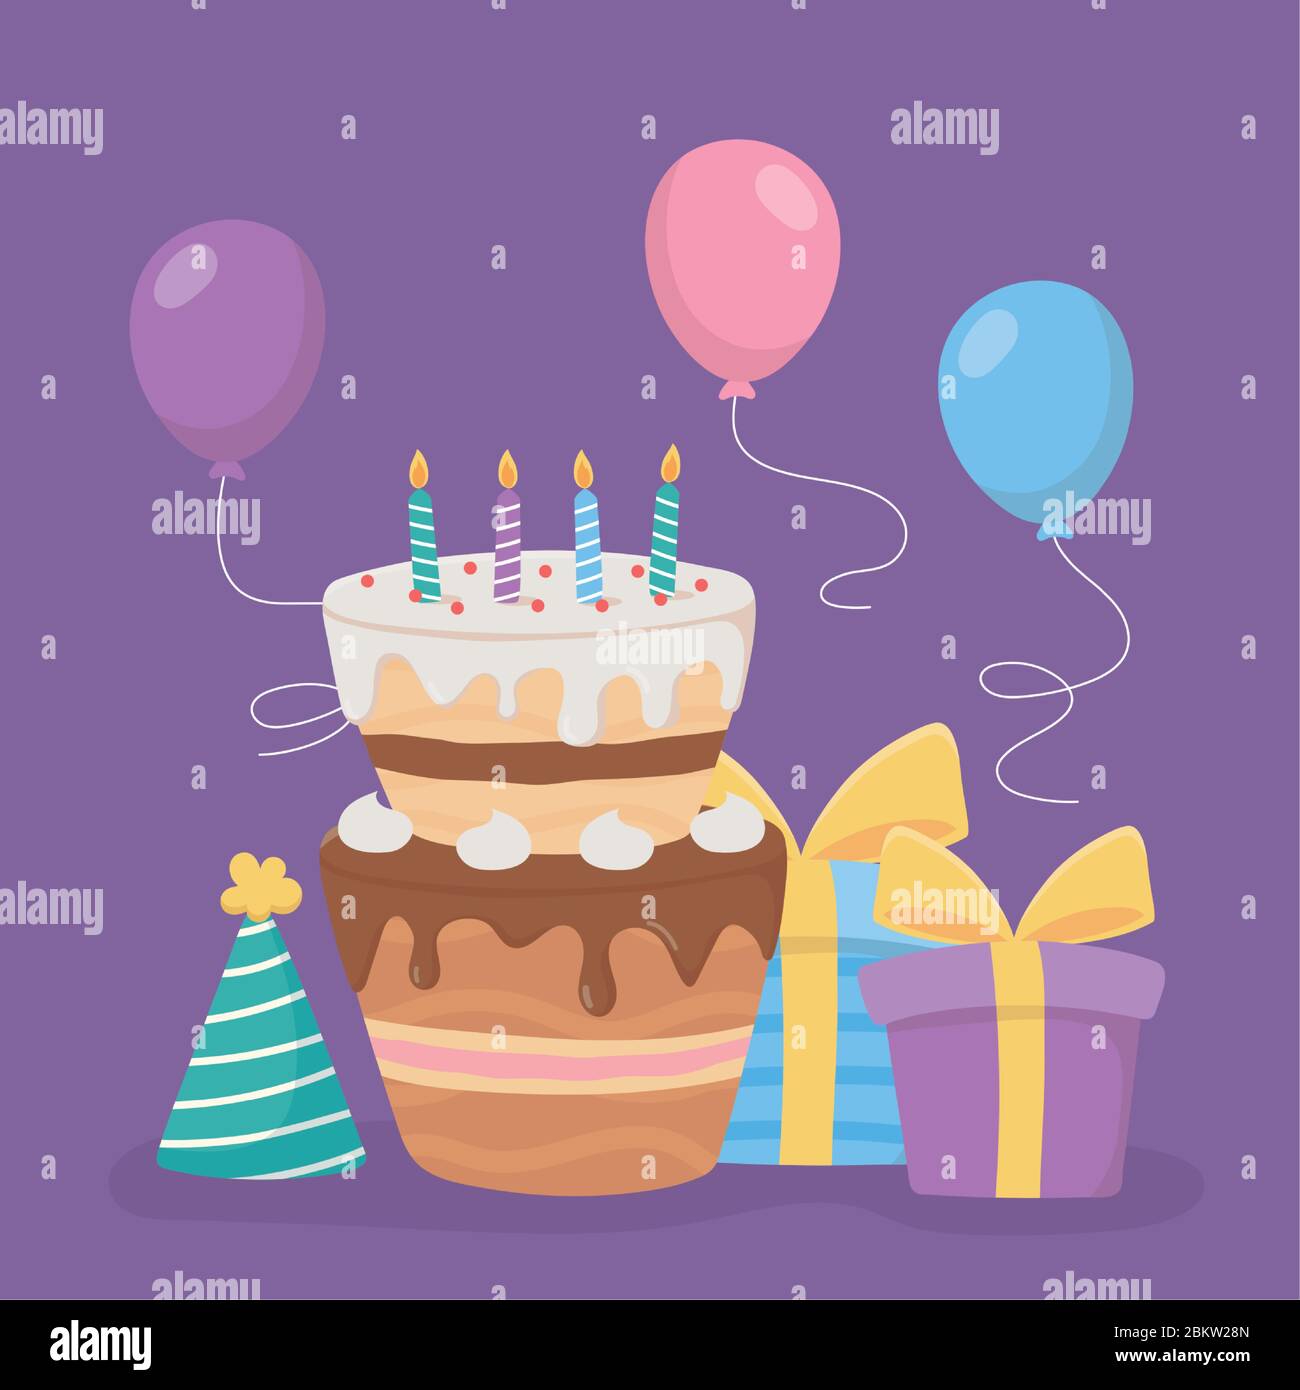 Happy Birthday Cake with Letters Candles with Fire Stock Image - Image of  anniversary, celebrate: 259548229